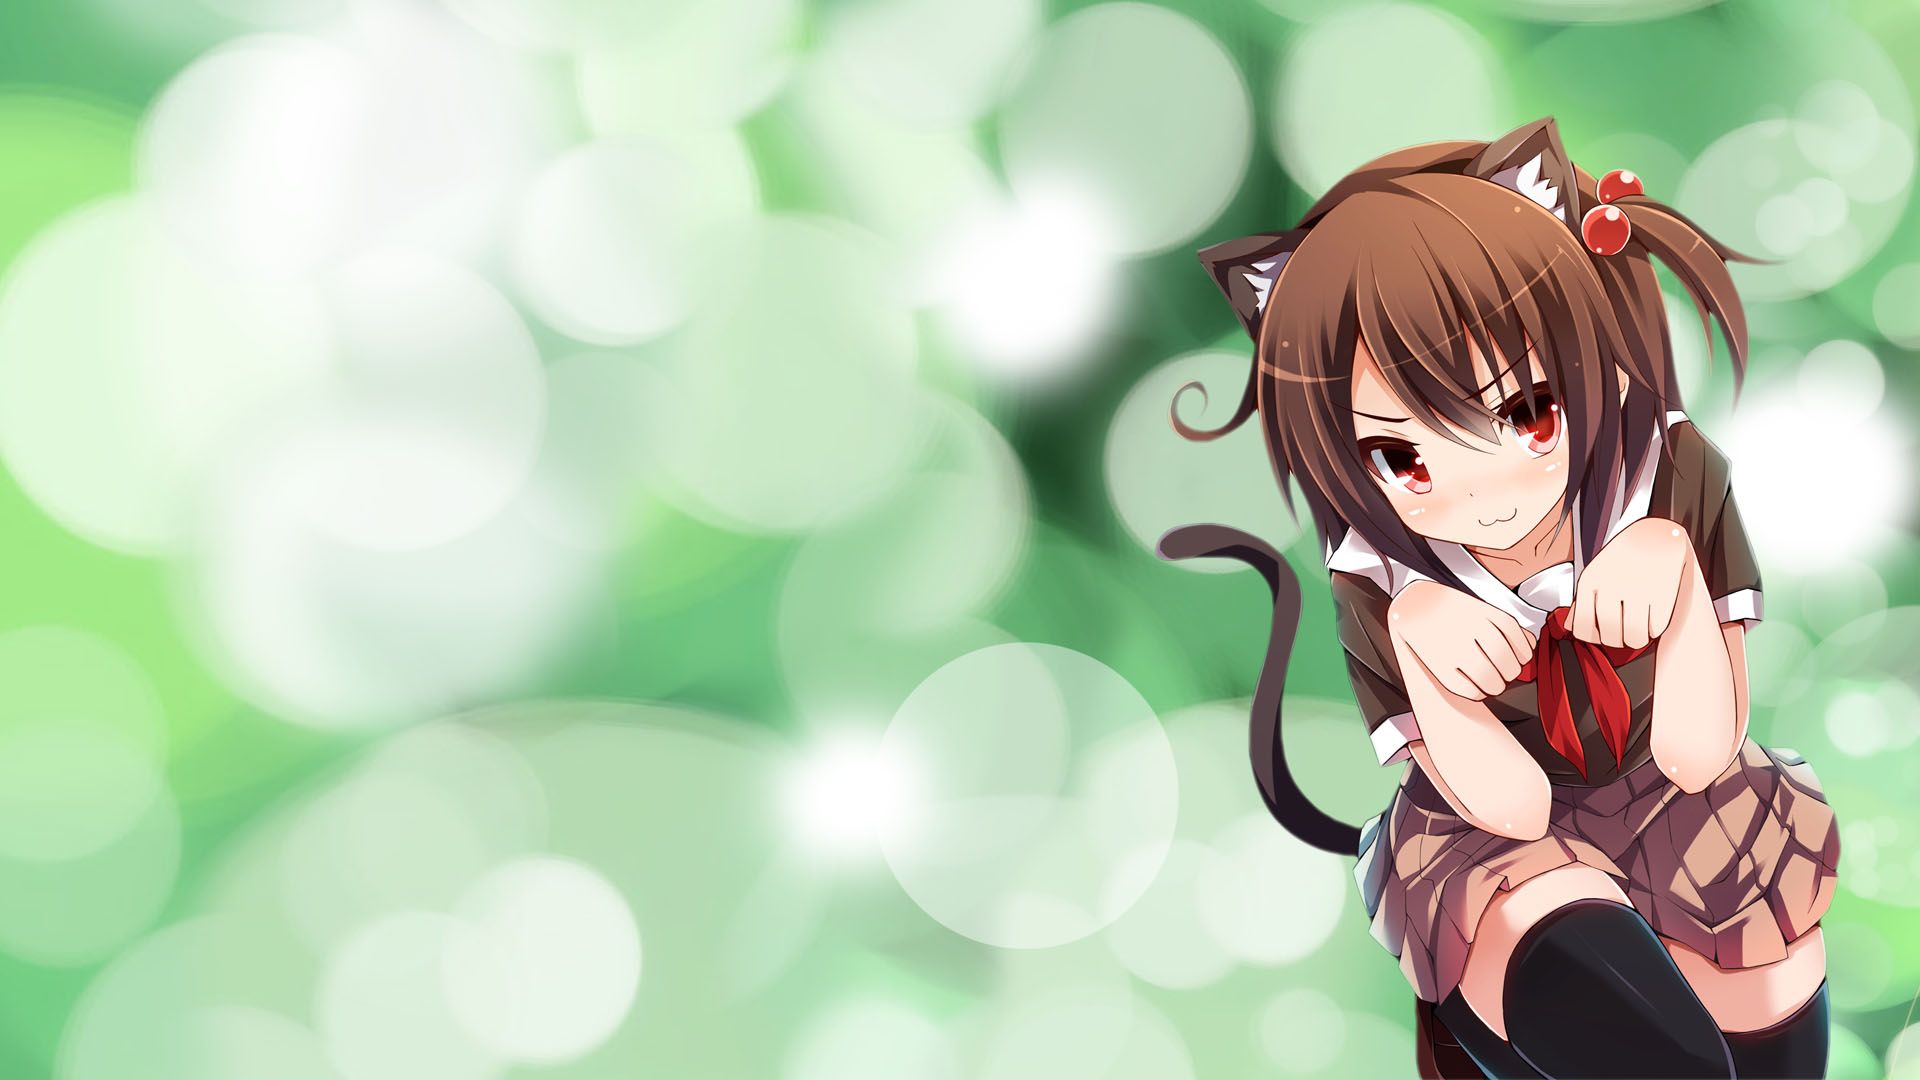 Lewd Anime Wallpapers - Wallpaper Cave. 